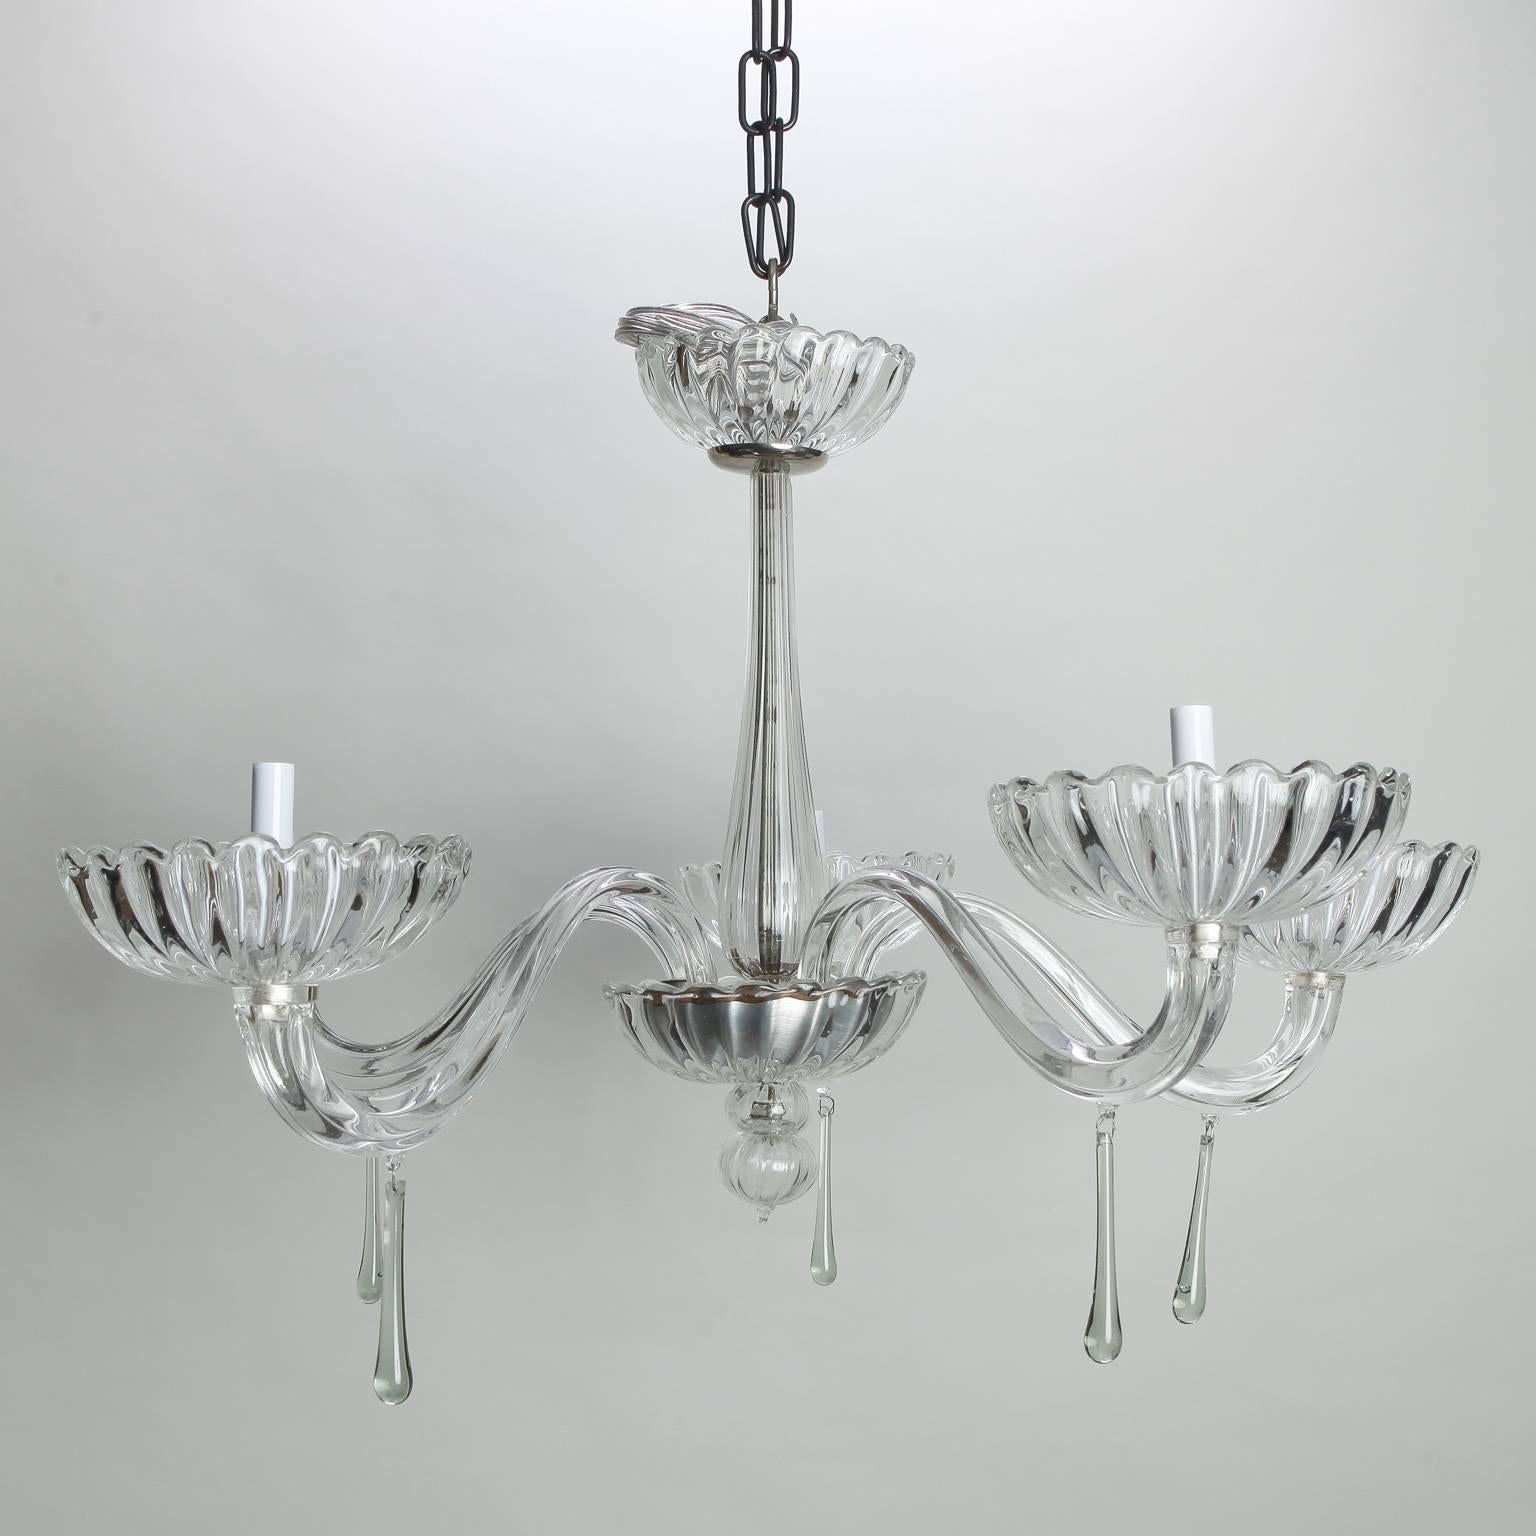 Clear Murano glass chandelier has elegant lines with five arms and ribbed bobeches, circa 1960s, long slender drops and a clear glass ceiling canopy. Excellent vintage condition with new wiring for US electrical standards.
               